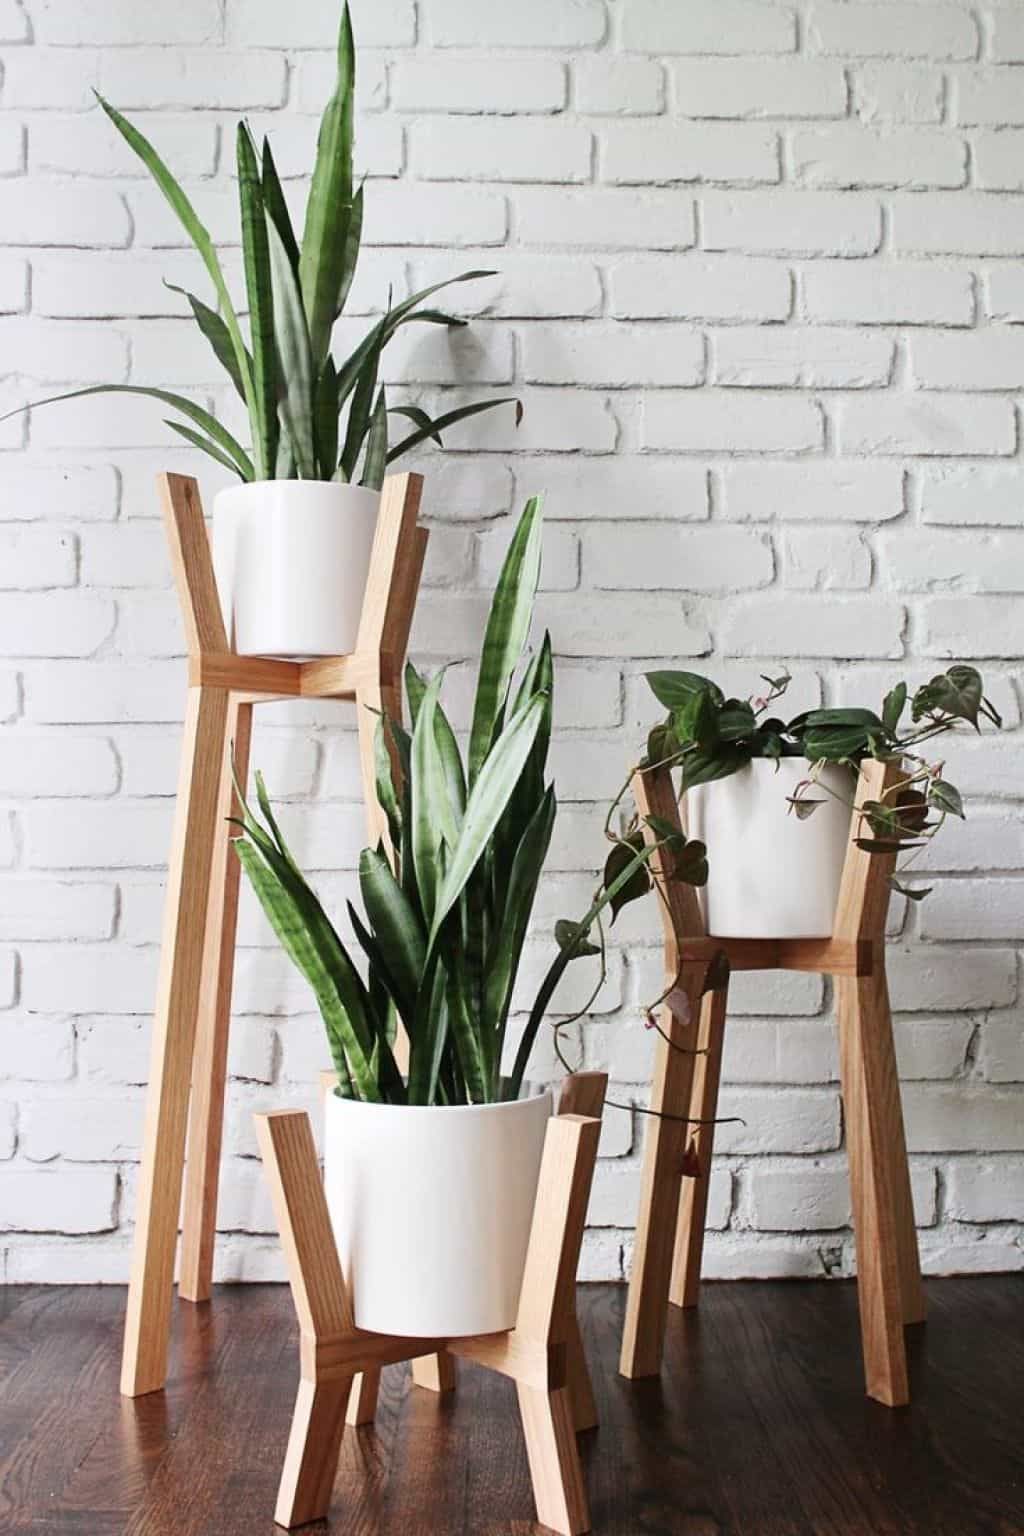 Choosing Plant Stands For Indoor Plants -   13 pidestall plants Stand ideas